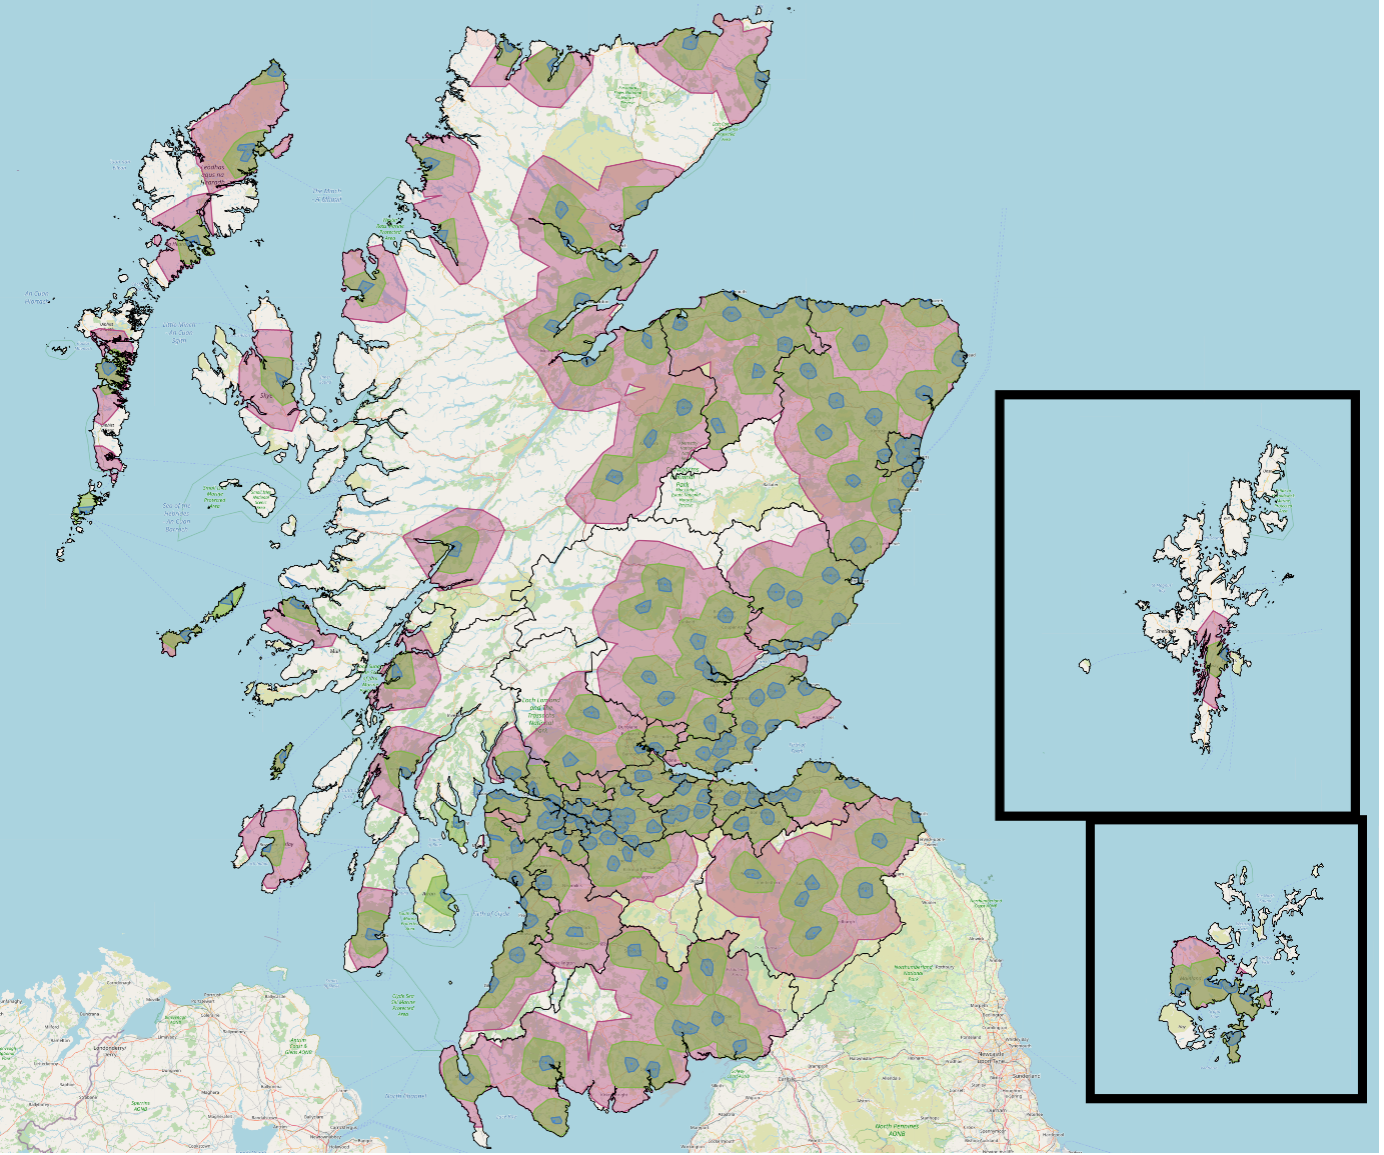 A map of recycling sites in Scotland showing drive times to each site